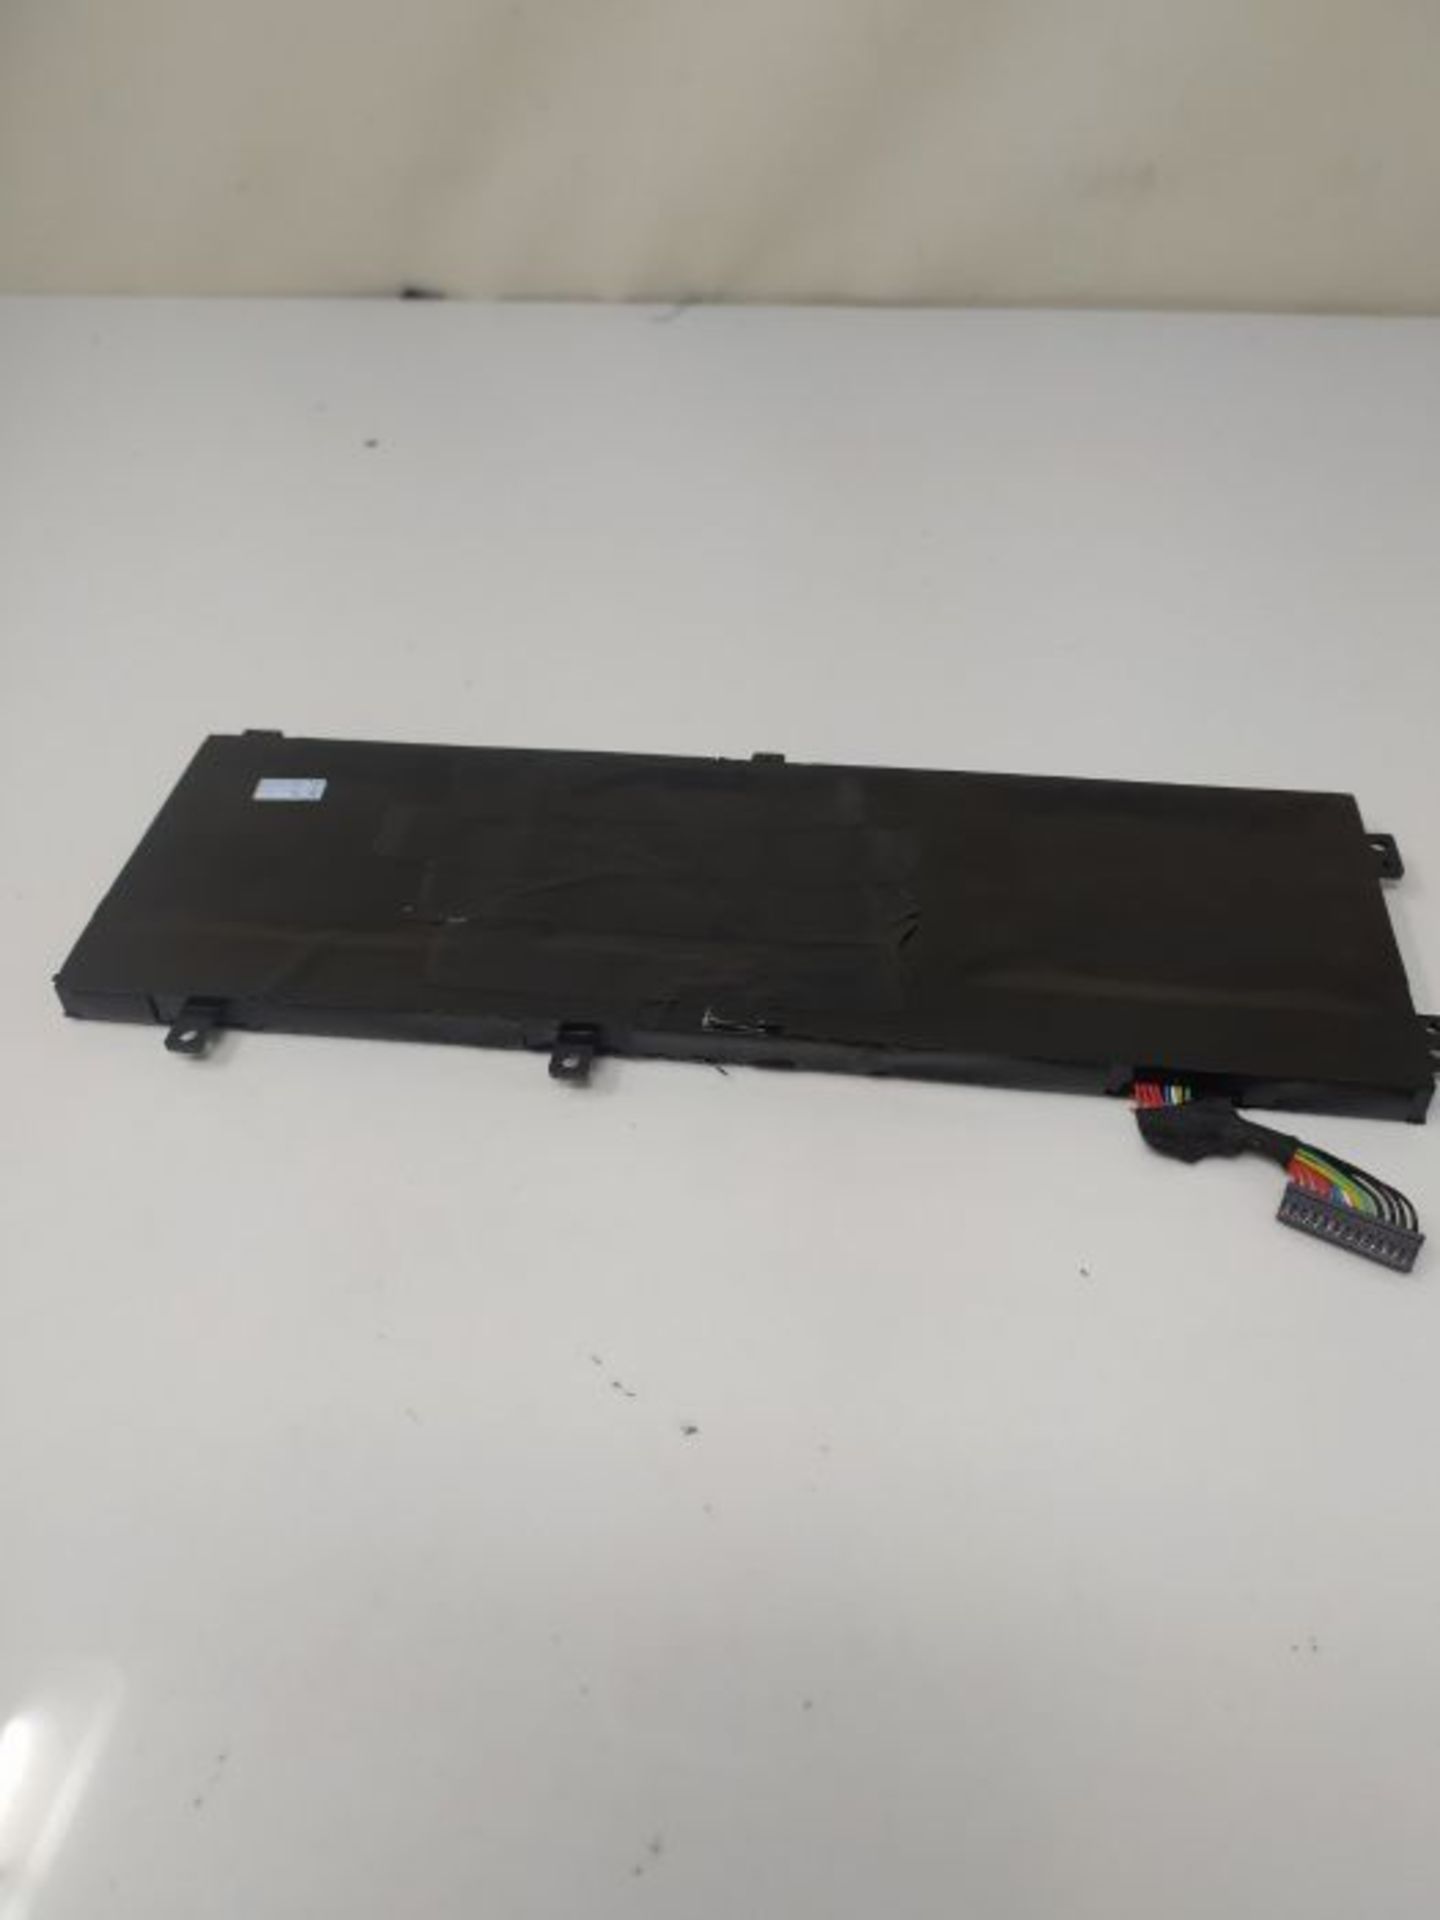 ASKC 56Wh RRCGW Laptop Battery Replacement for Dell XPS 15 9550 Precision 15 5510 Mobi - Image 2 of 2